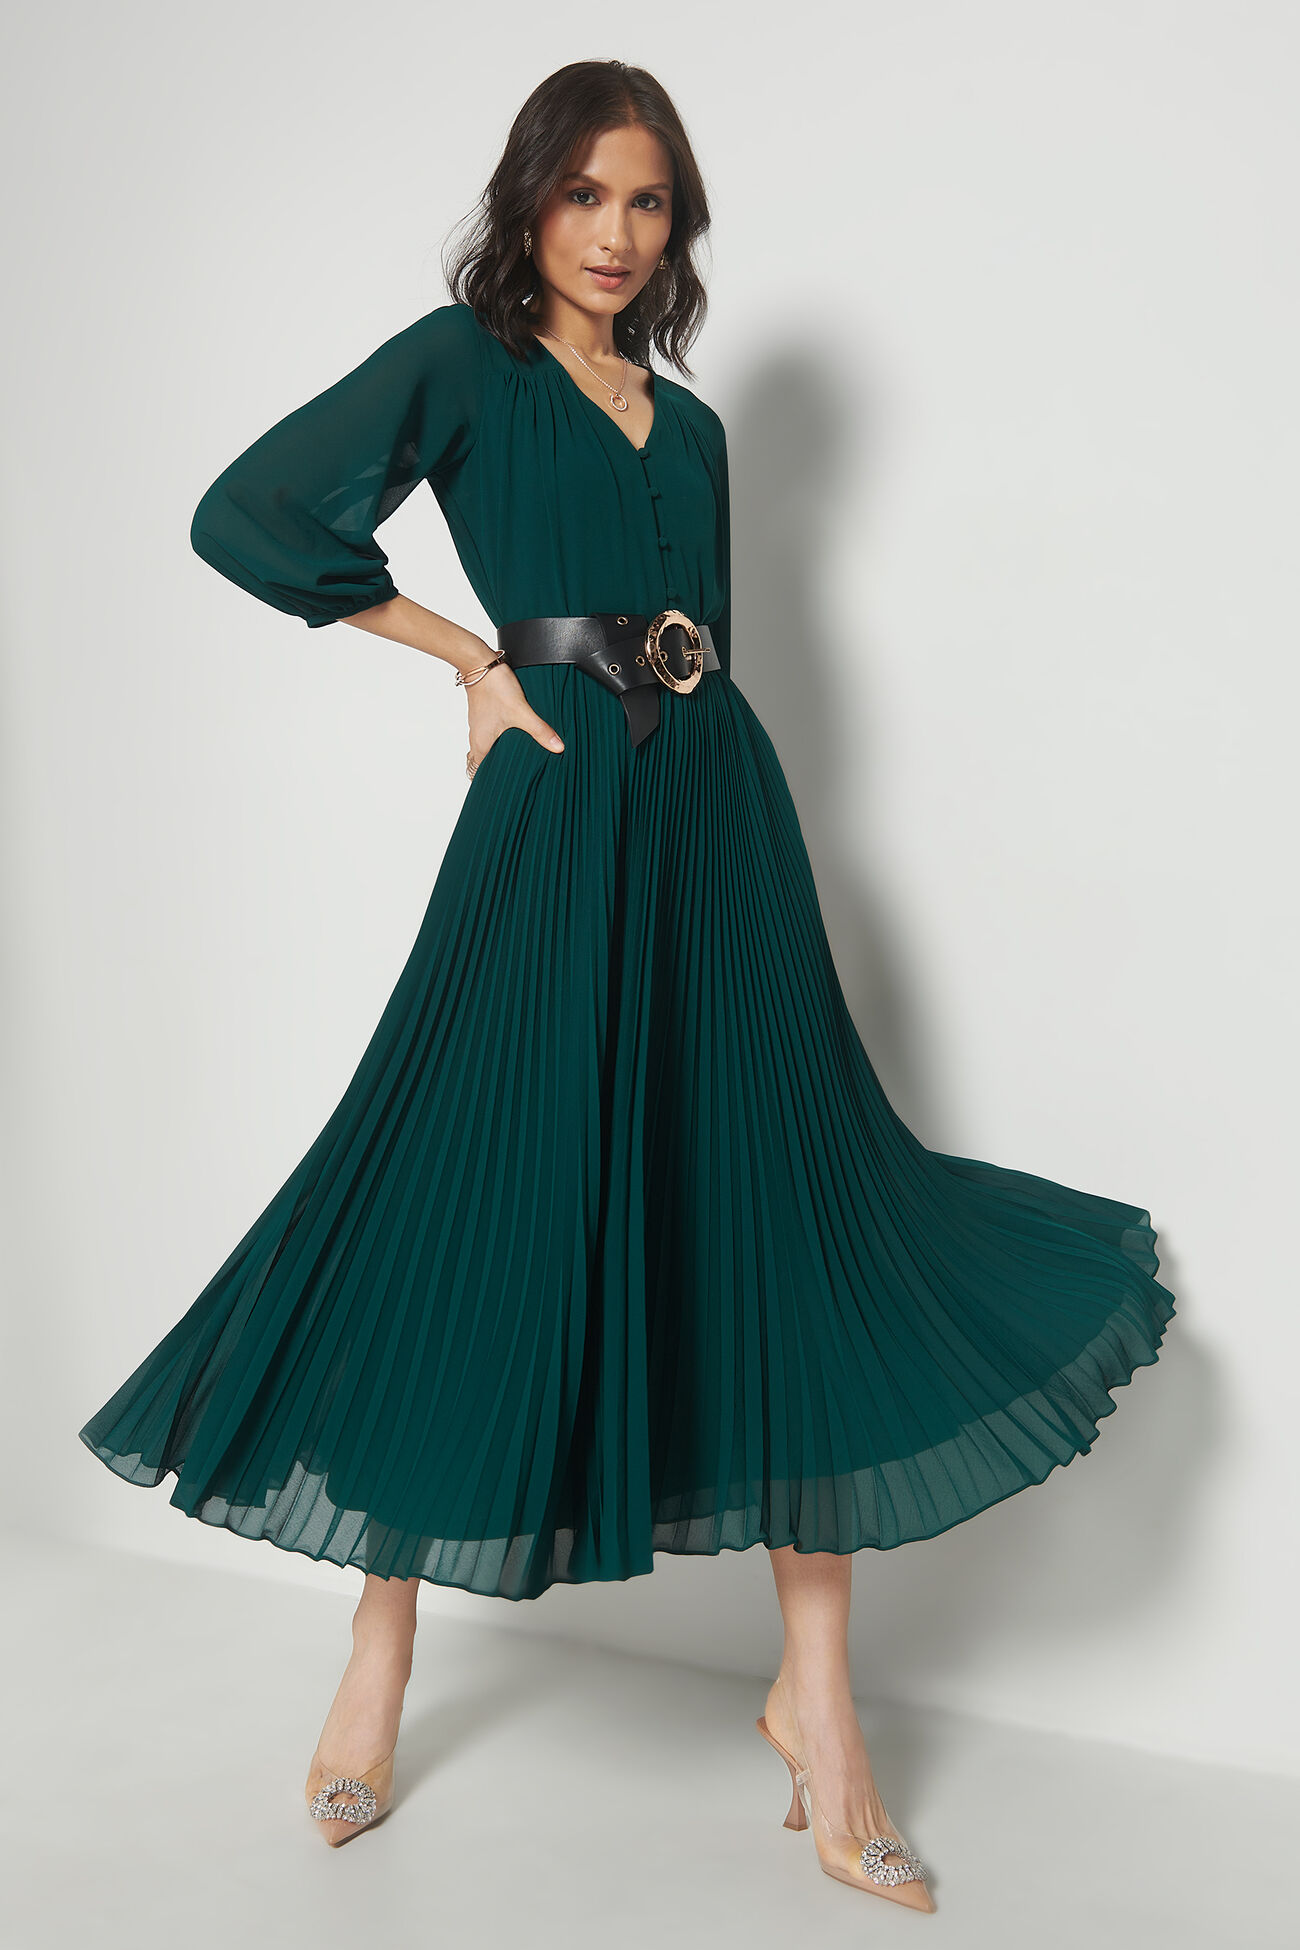 Aubergine Solid Flared Dress, Green, image 1